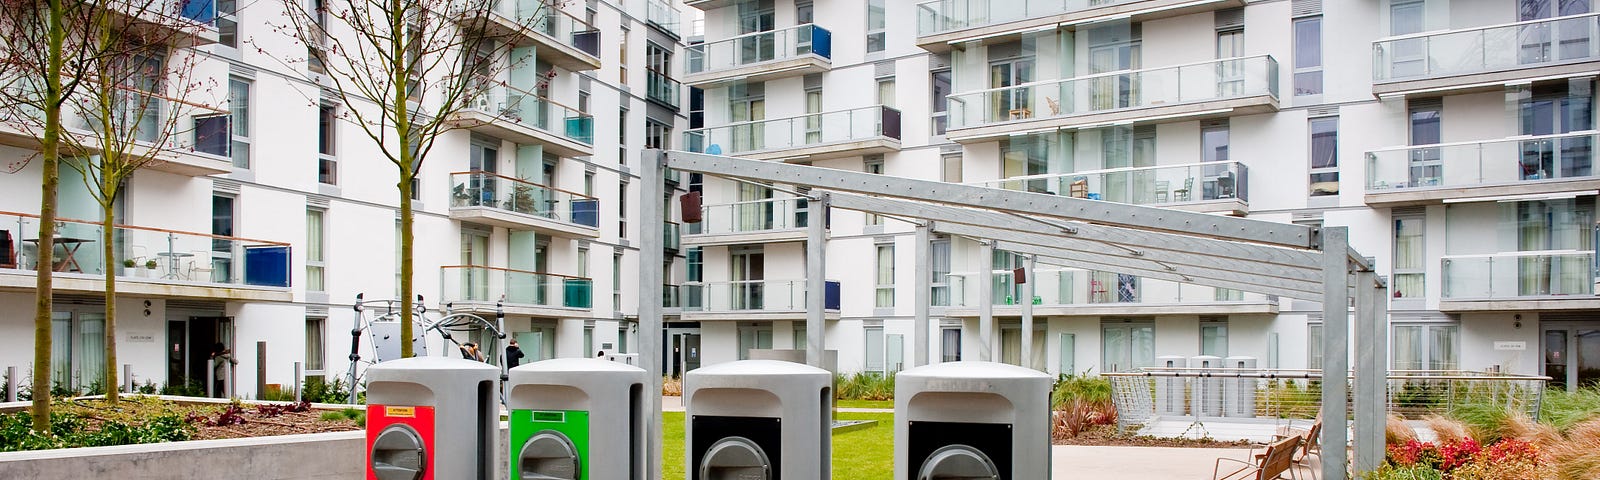 A photograph shows four waste chutes in a courtyard of Wembley Park, which has an underground vacuum waste system.